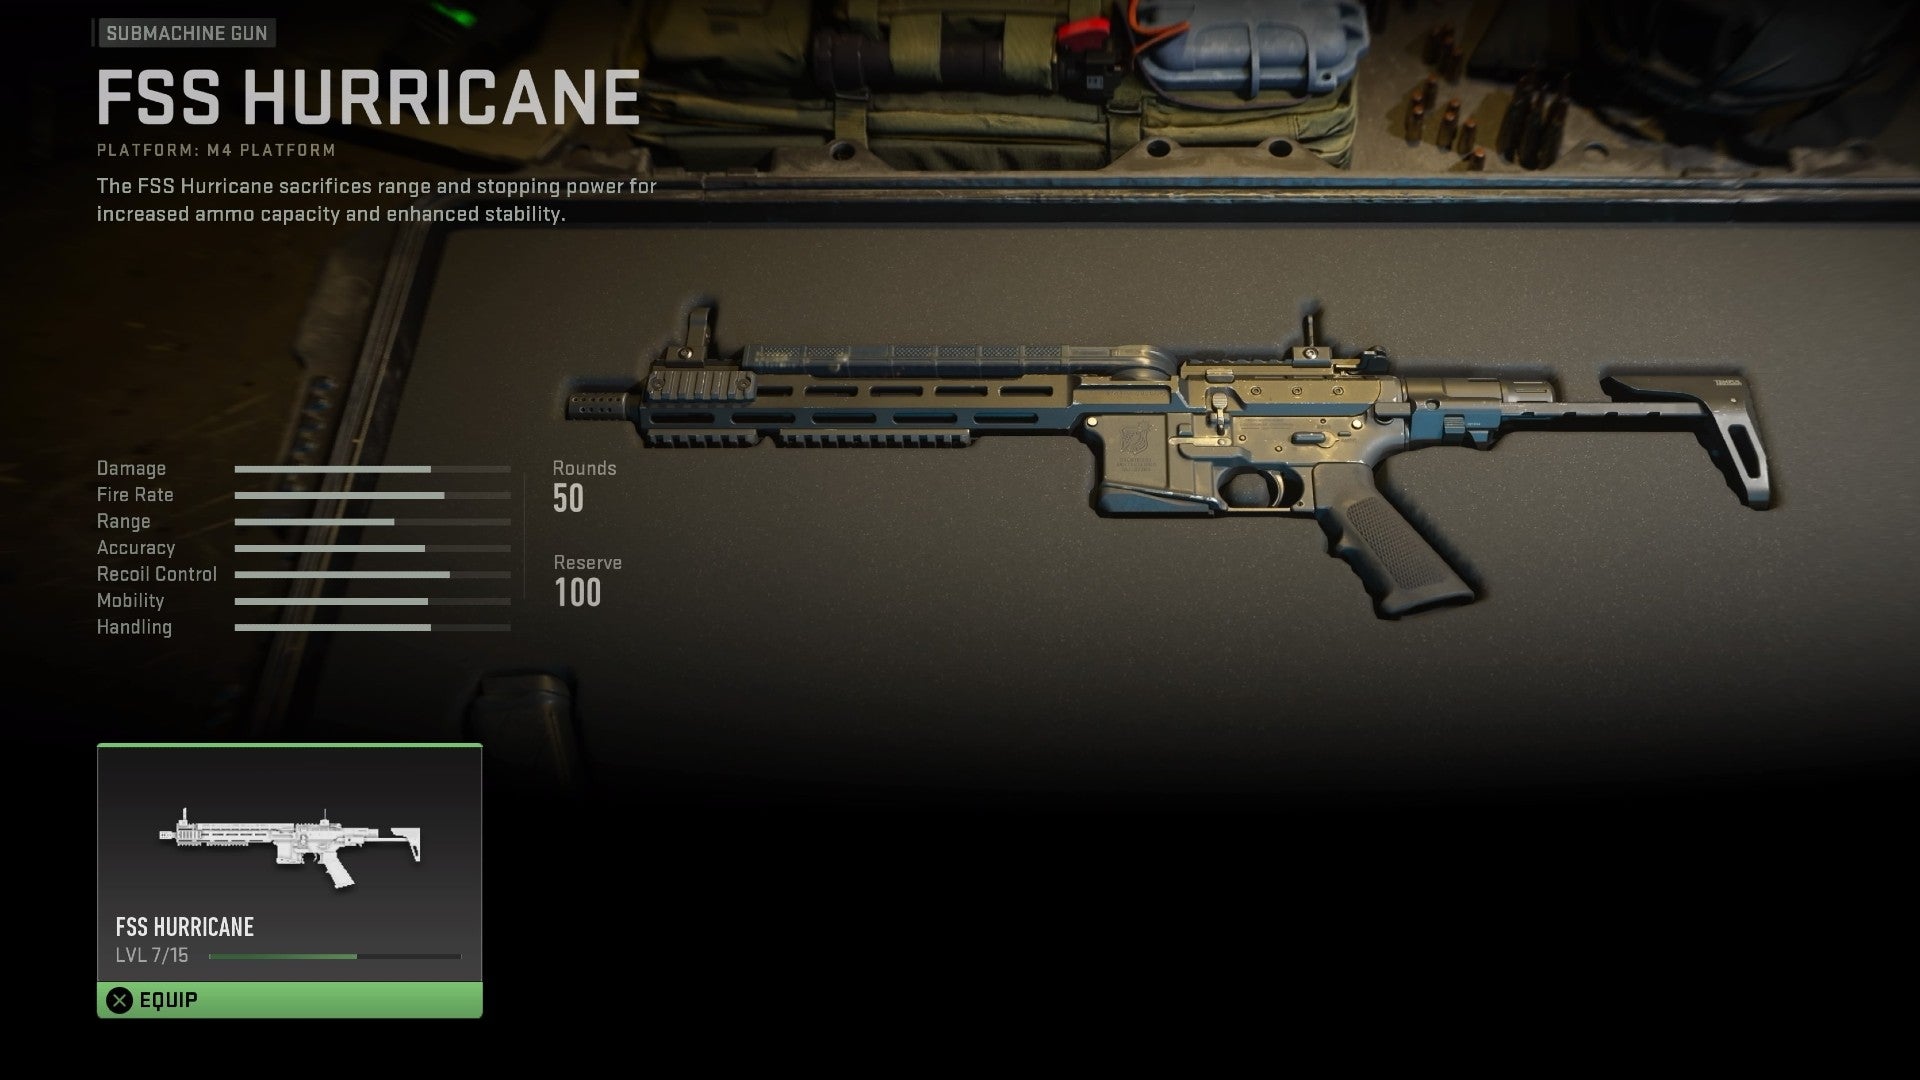 Modern Warfare 2 beta screenshot showing the FSS Hurricane in a weapon container, with the stats on the left.